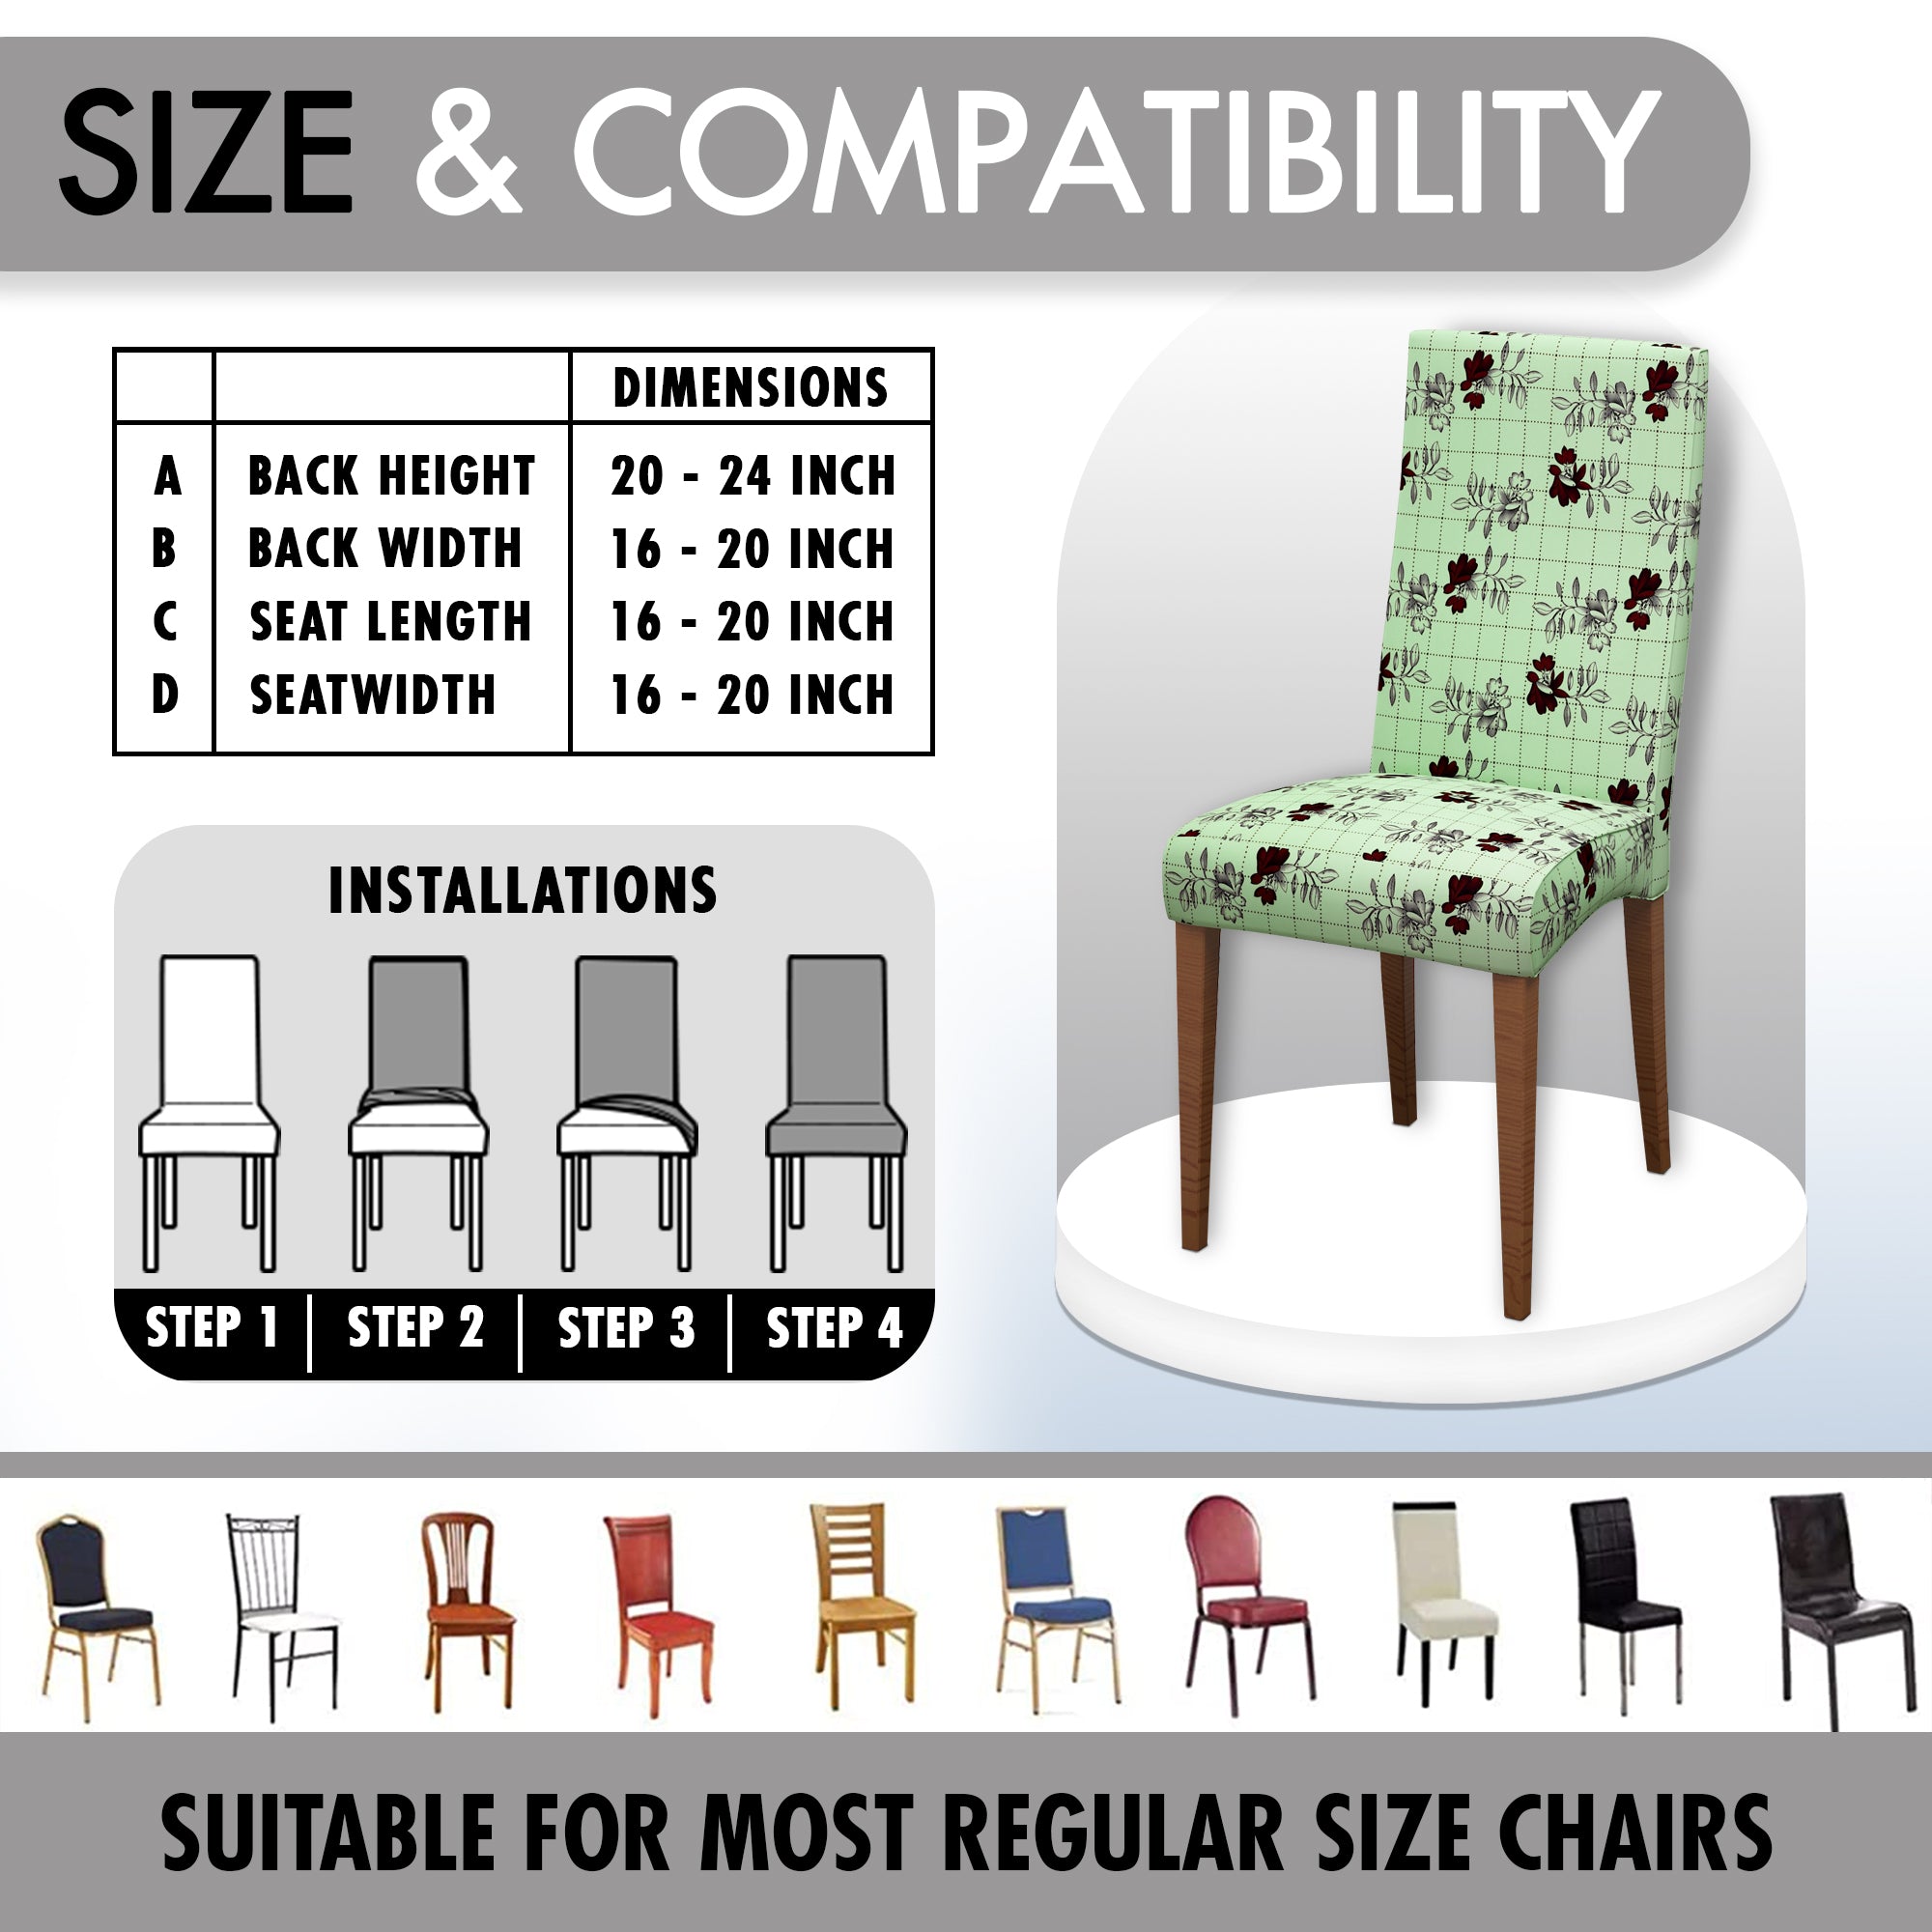 Polyester Spandex Stretchable Printed Chair Cover, MG27